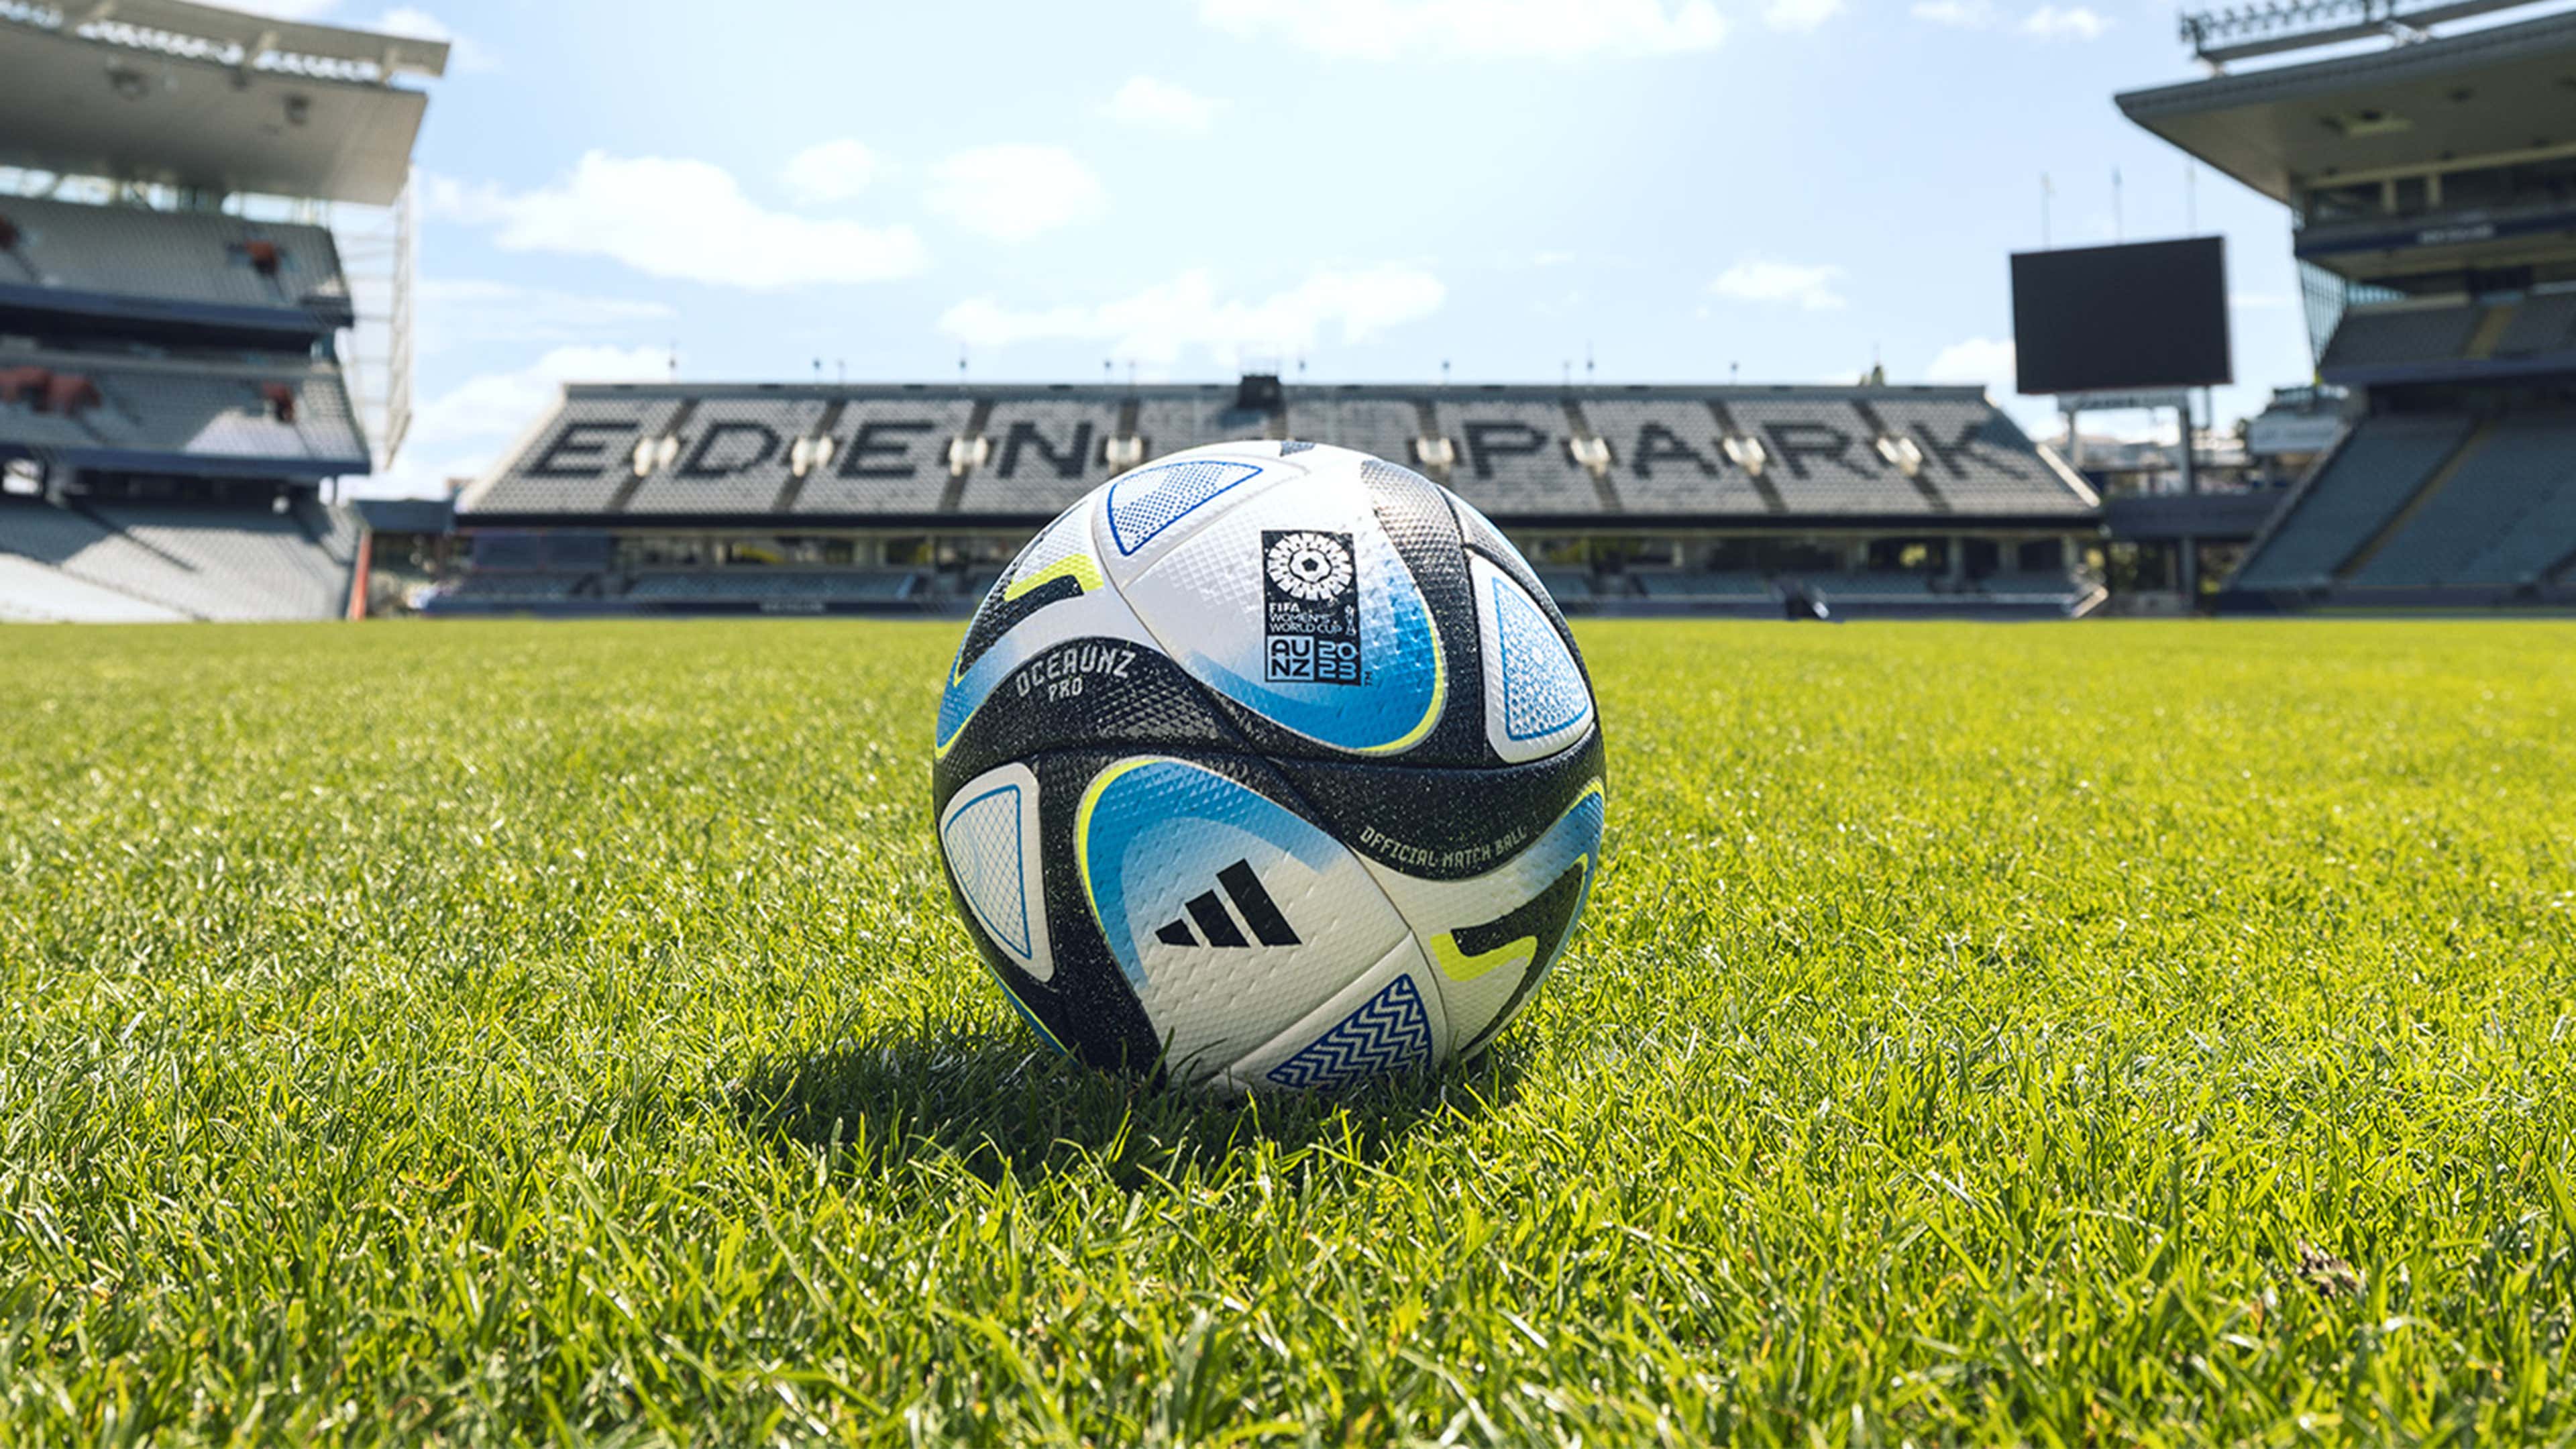 adidas unveil official match ball for 2023 Women's World Cup